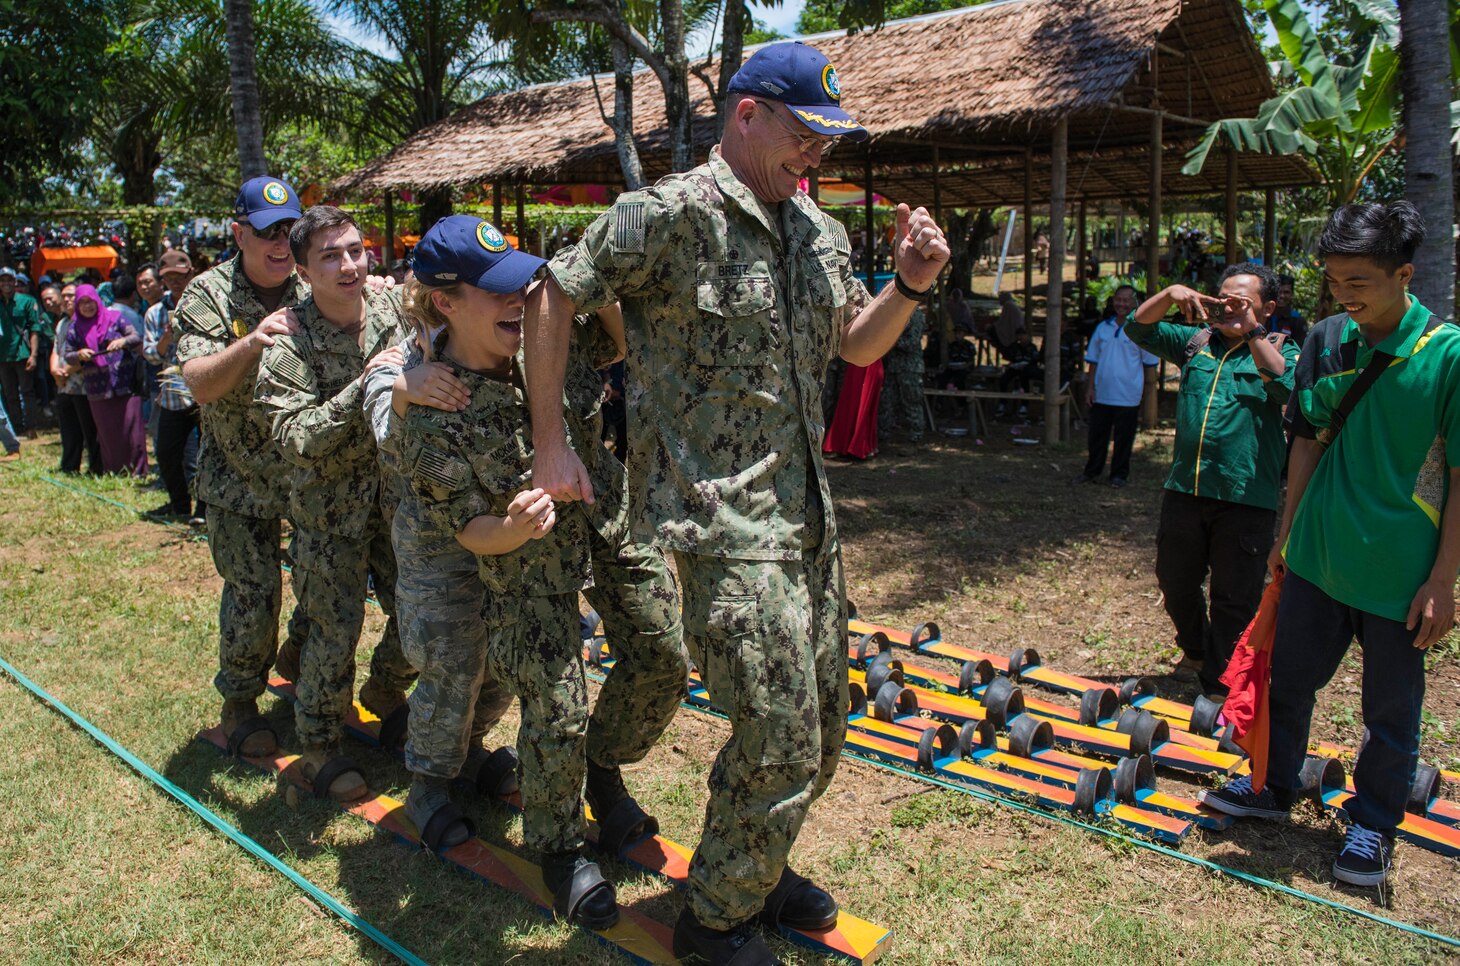 BENGKULU, Indonesia (March 31, 2018) Capt. David Bretz, Mission Commander of Pacific Partnership 2018 (PP18), leads Pacific Partnership 2018 team members in a relay race during a cultural exchange event at Teaching Farm University Dehasen near Bengkulu, Indonesia during Pacific Partnership 2018 (PP18). PP18’s mission is to work collectively with host and partner nations to enhance regional interoperability and disaster response capabilities, increased stability and security in the region, and foster new and enduring friendships across the Indo-Pacific Region. Pacific Partnership, now in its 13th iteration, is the largest annual multinational humanitarian assistance and disaster relief preparedness mission conducted in the Indo-Pacific. (U.S. Navy photo by Mass Communication Specialist 2nd Class Joshua Fulton/Released)